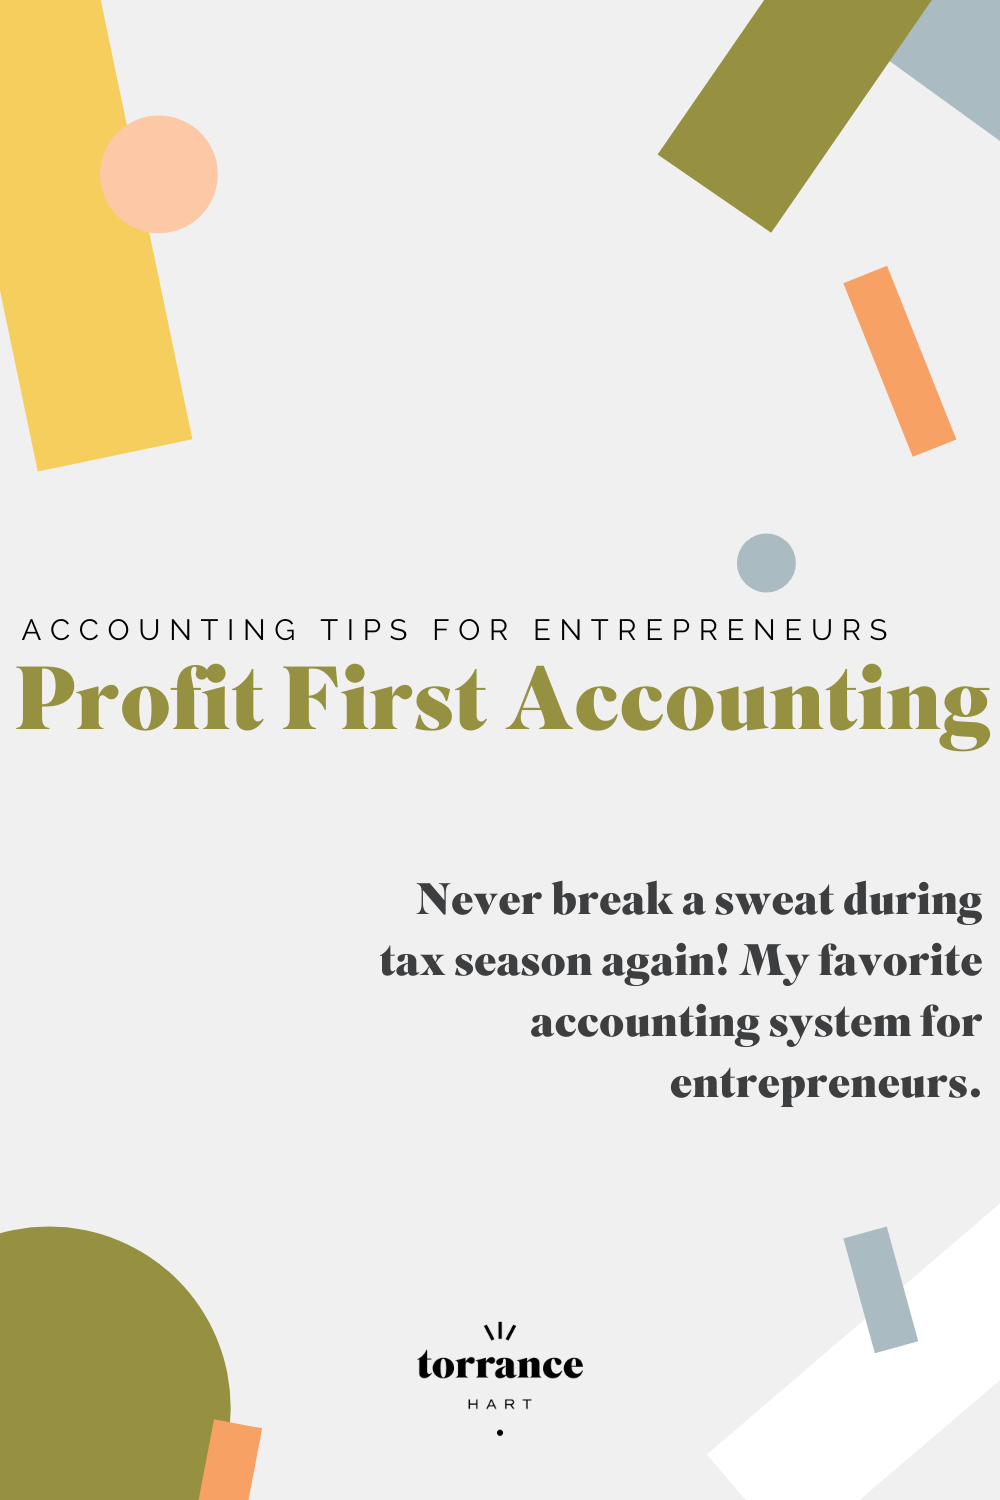 Why I Love Profit First Accounting